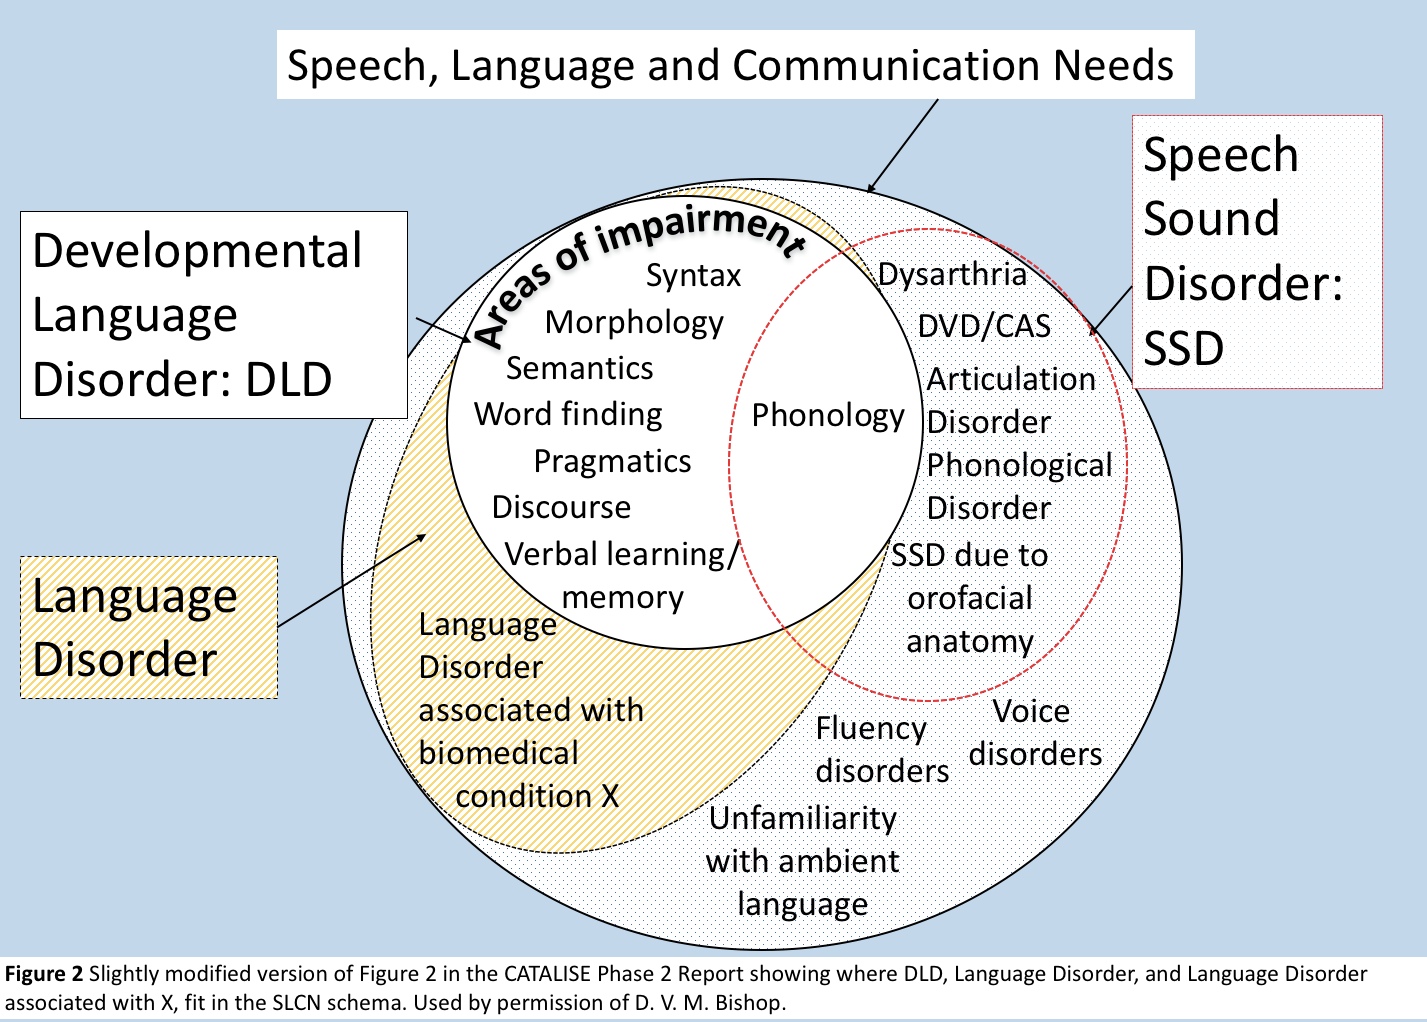 Figure 2: Slightly modified version of Figure 2 in the CATALISE Phase 2 Report showing where DLD, Language Disorder, and Language Disorder associated with X, fit in the SLCN schema. Used by permission of D. V. M. Bishop.